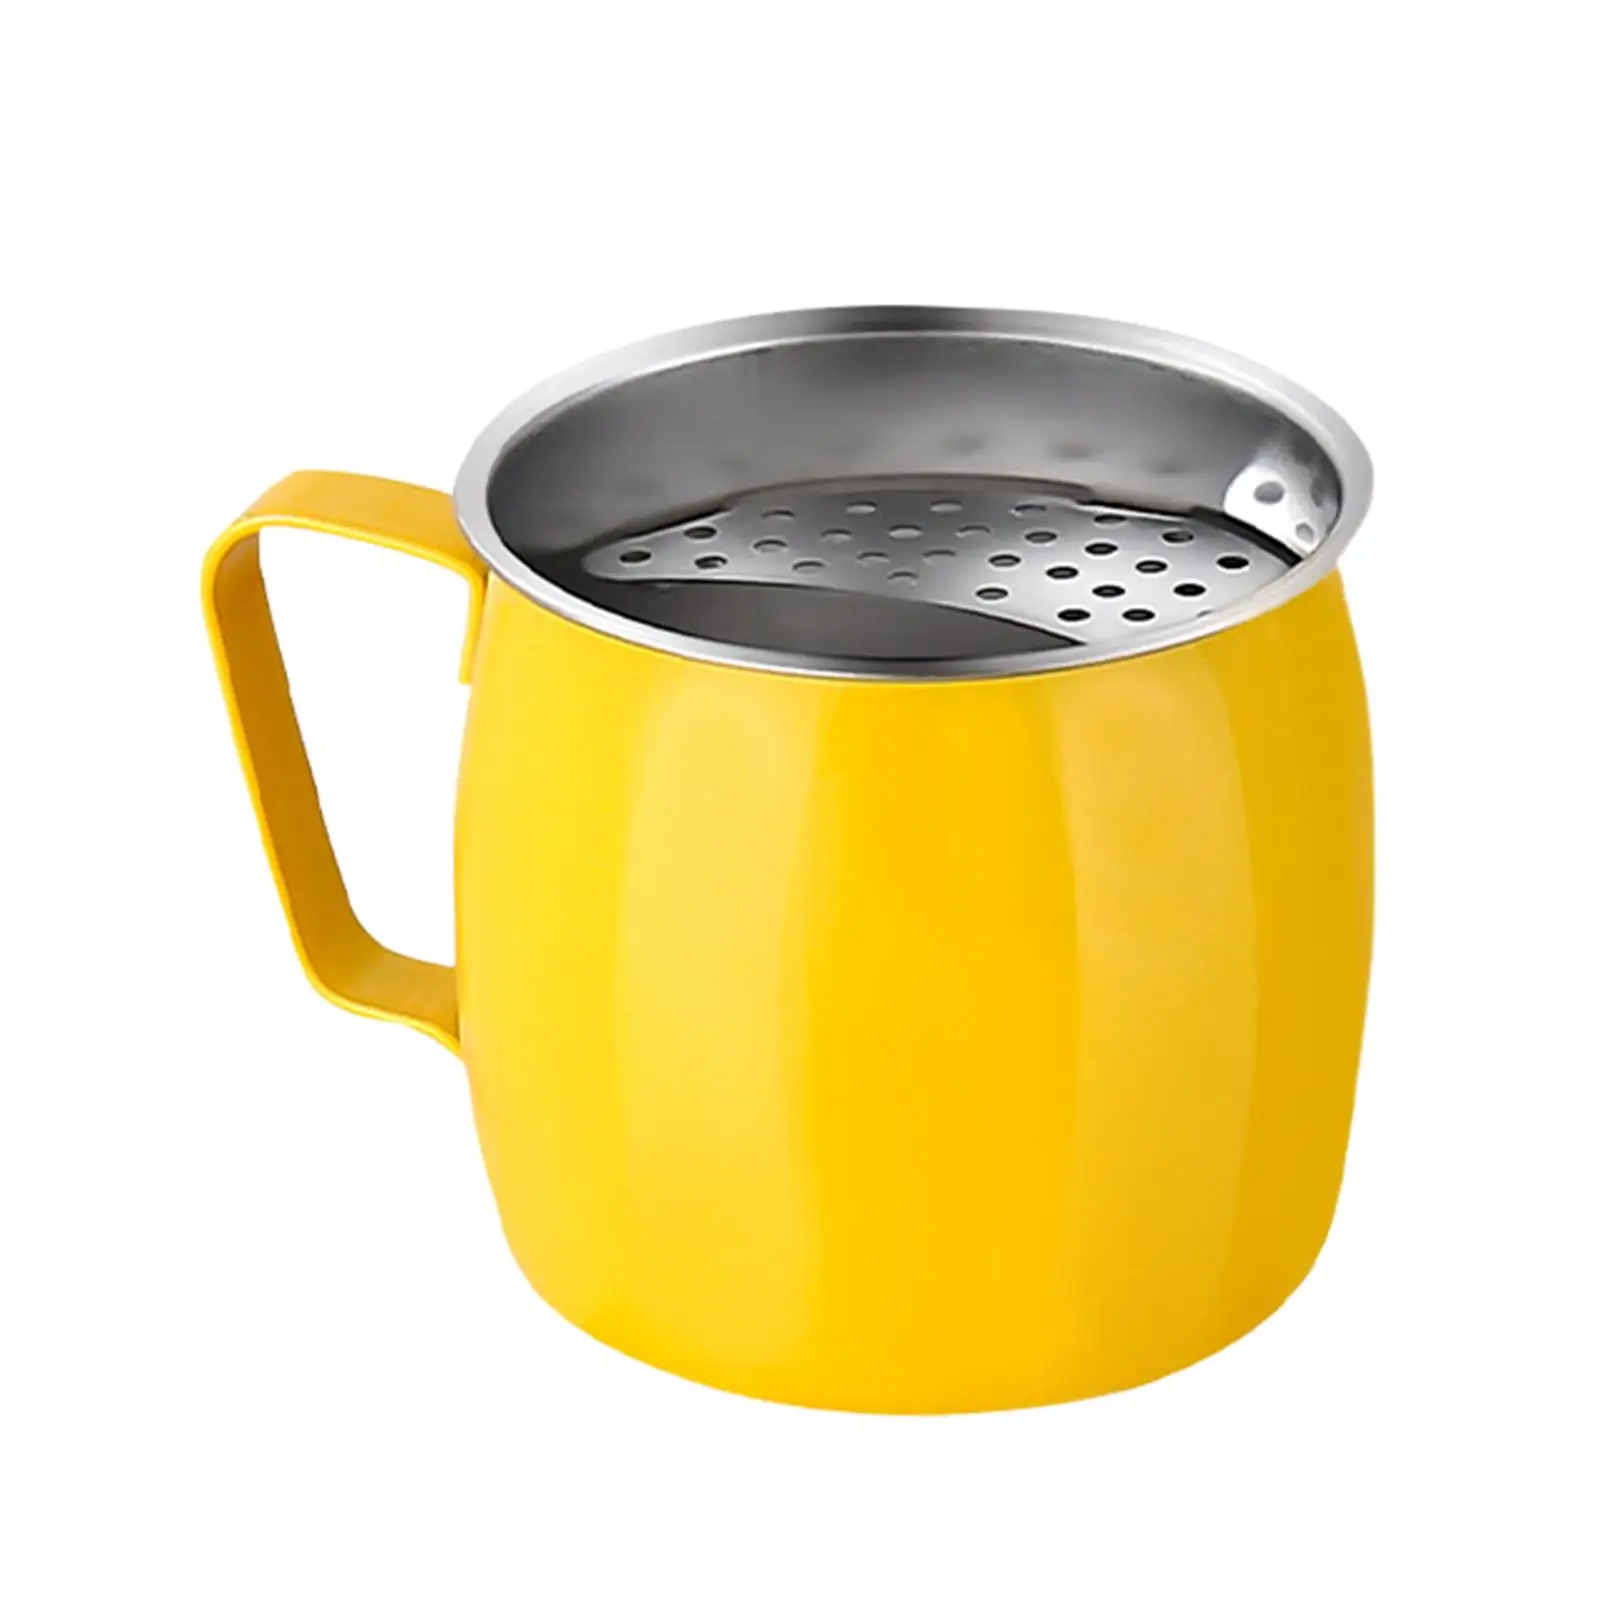 Stainless Steel Tea Cup Multipurpose Tea Steeping Sturdy with Filter Tea Water Separation Drinking Cup for Daily Use Office Home